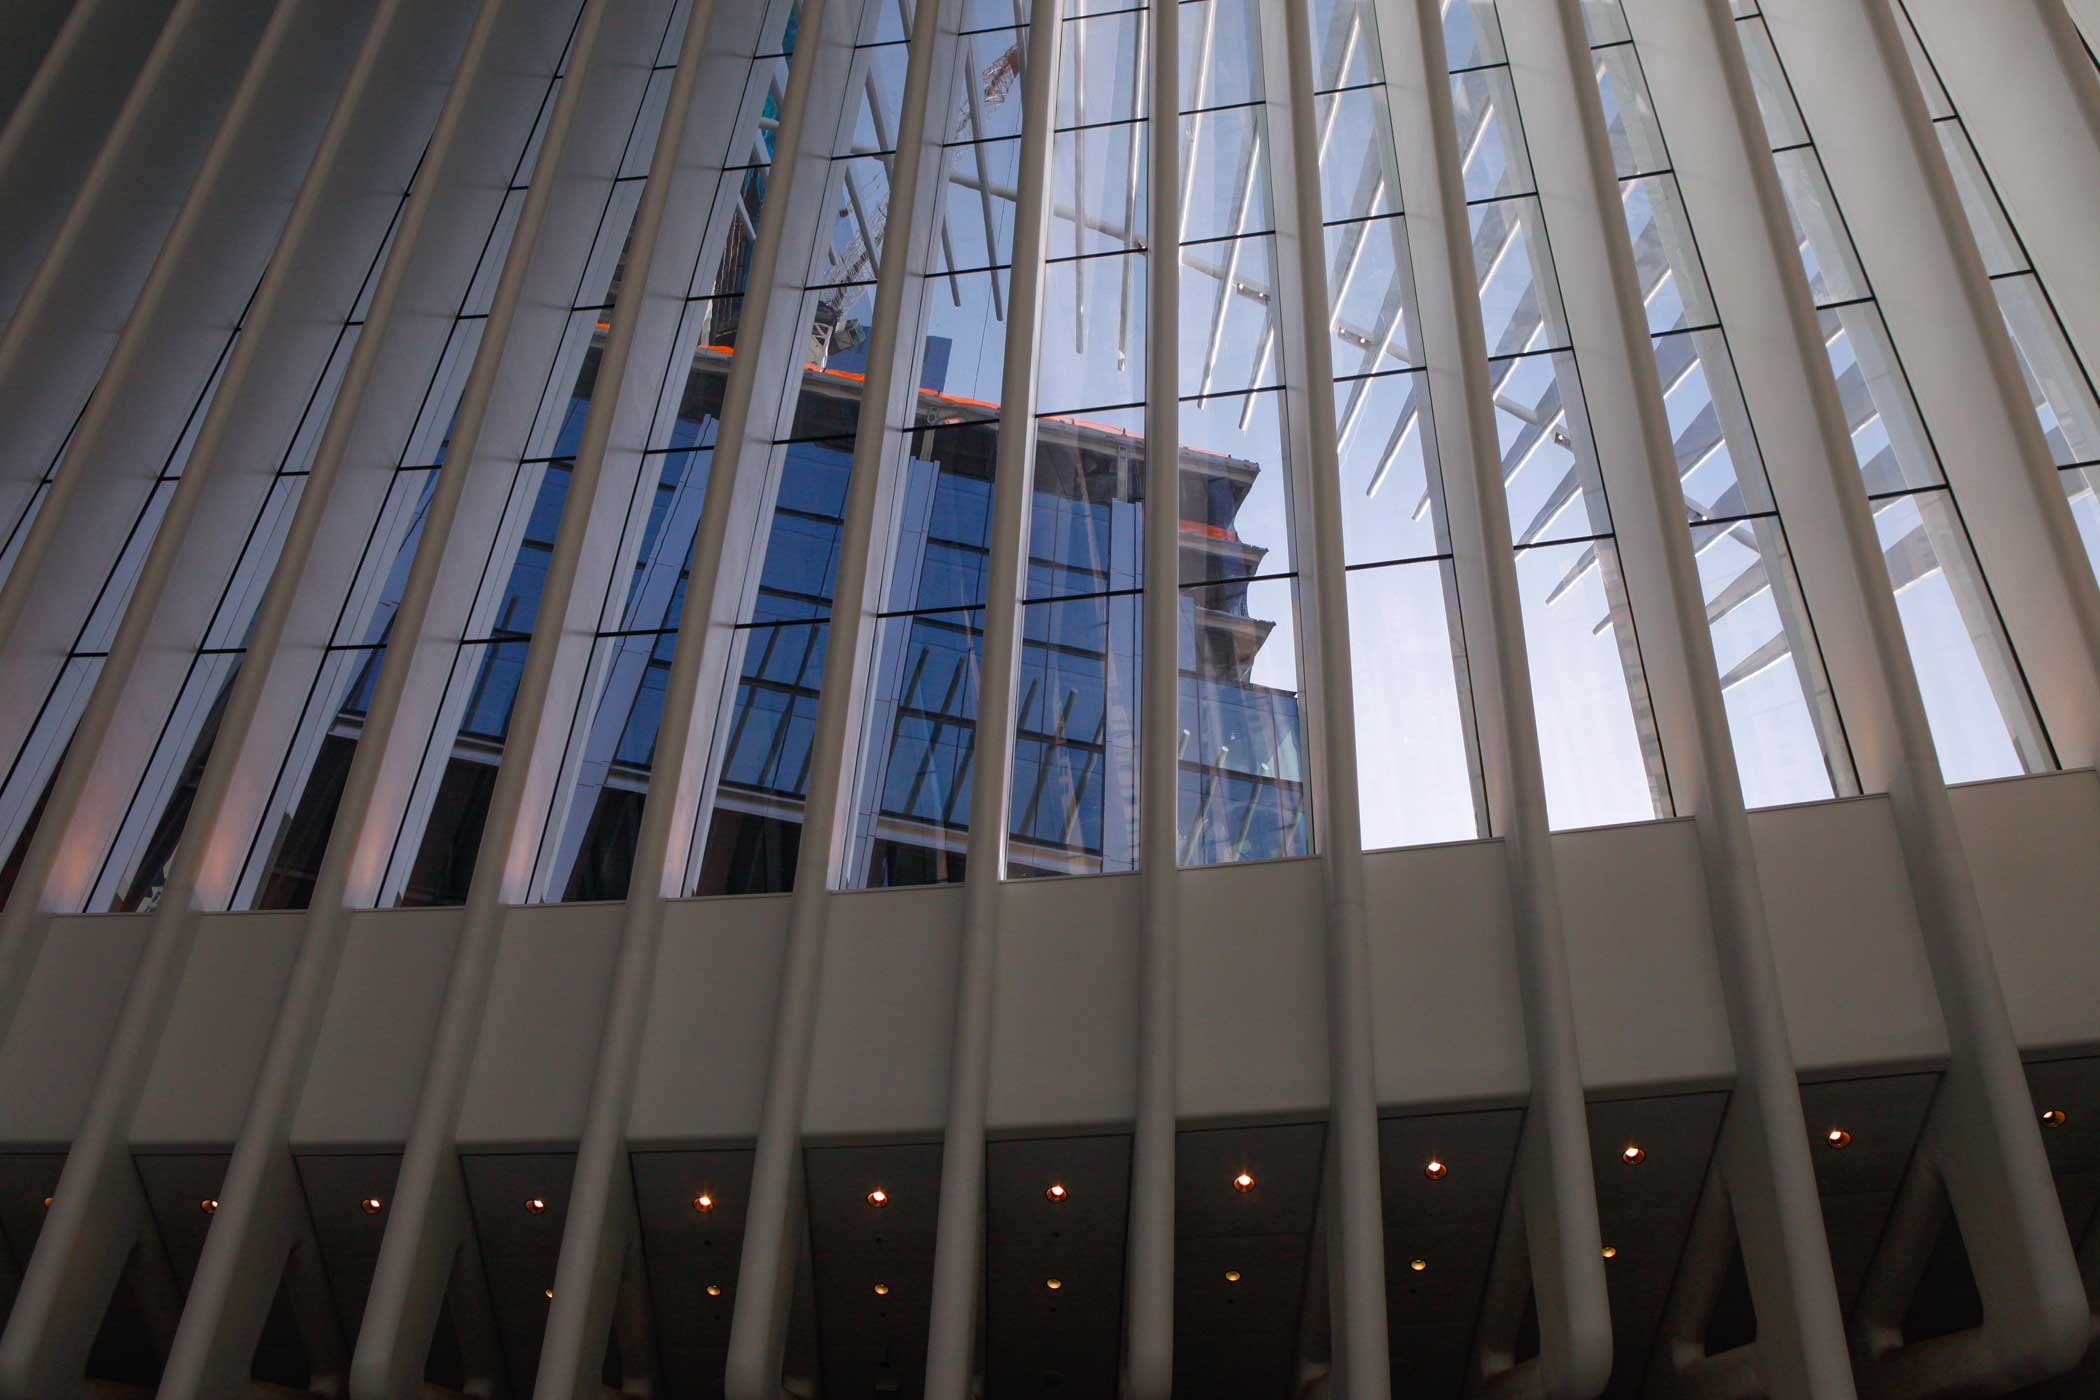 The World Trade Center 3 building seen from the Oculus.